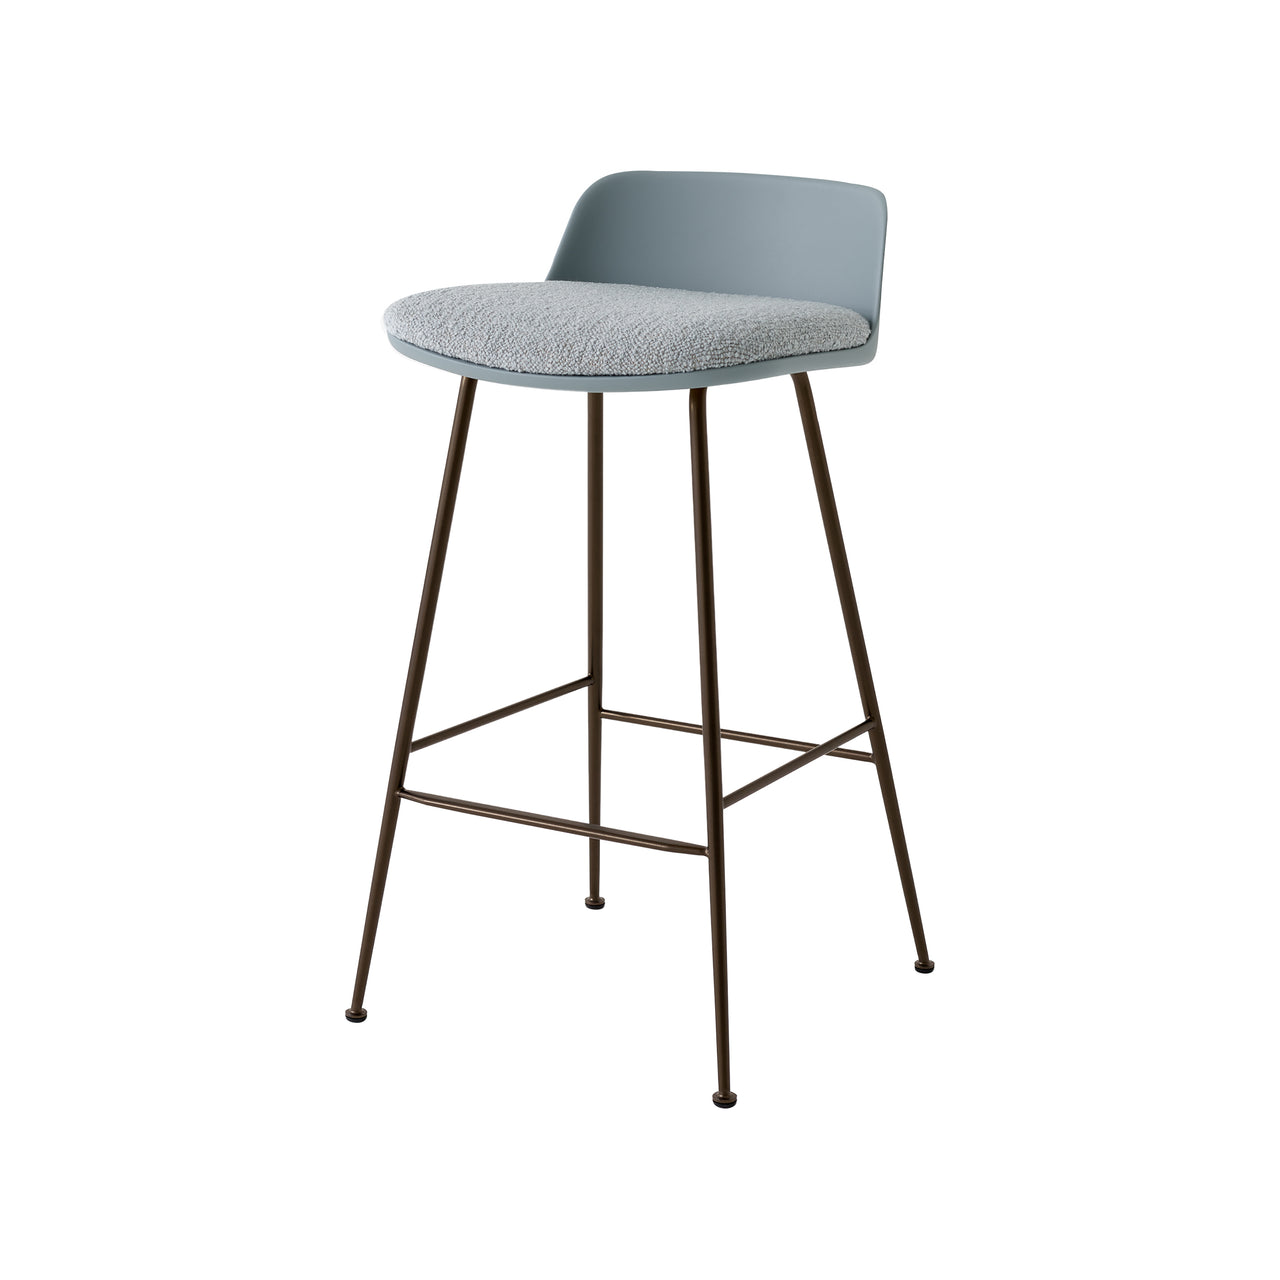 Rely Counter Stool: HW82 + Light Blue + Bronzed